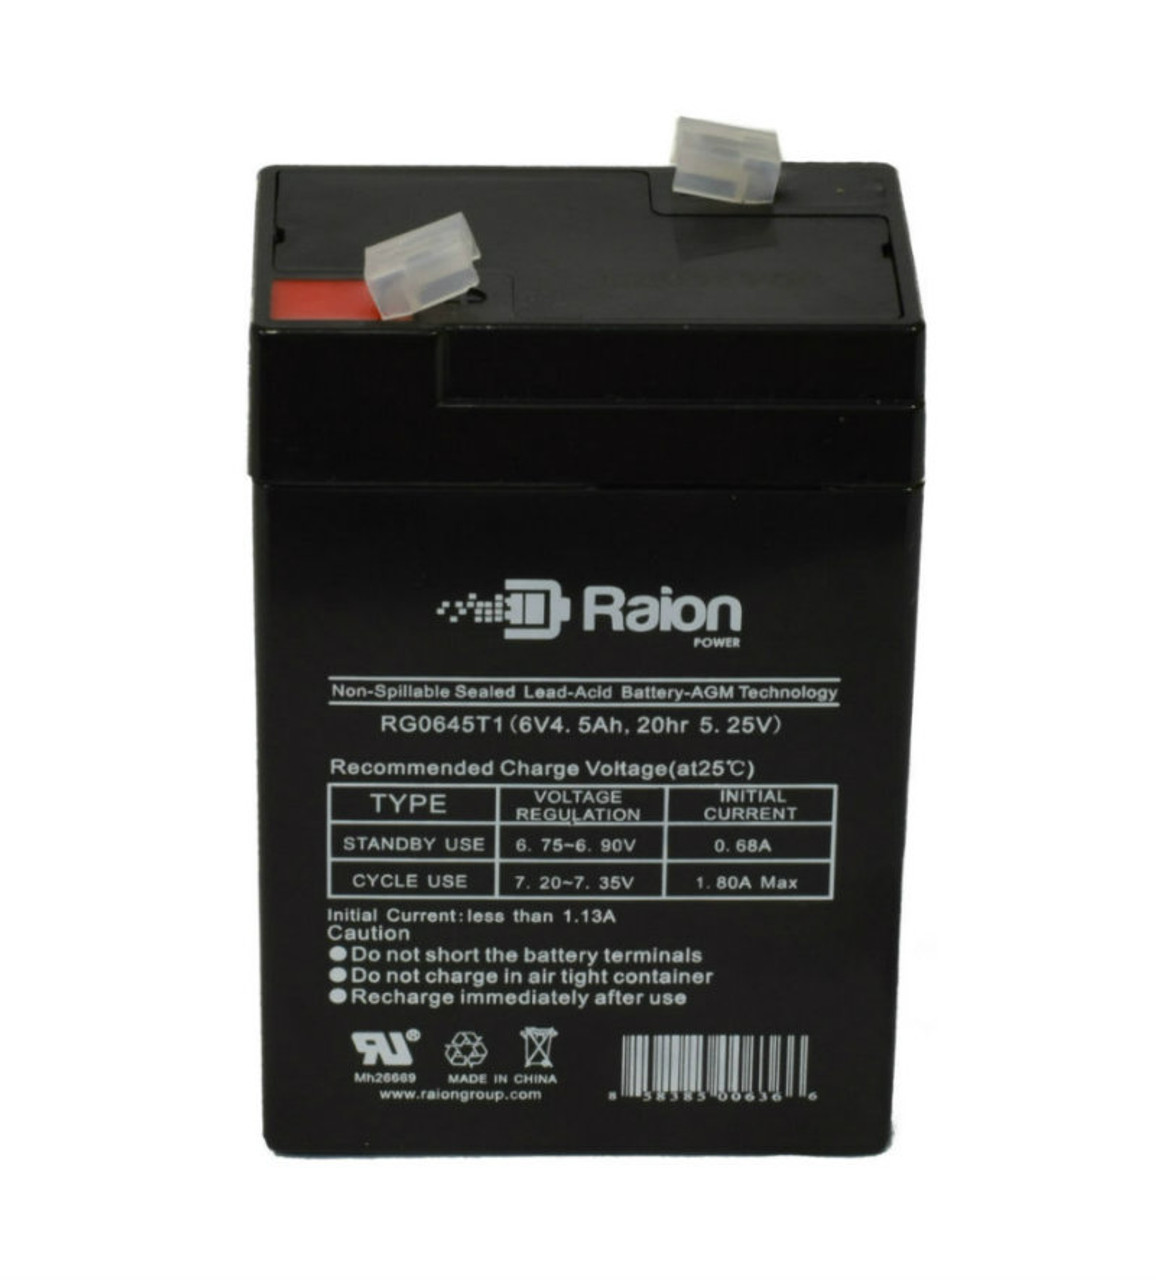 Raion Power RG0645T1 Replacement Battery Cartridge for Power Energy GB6-6